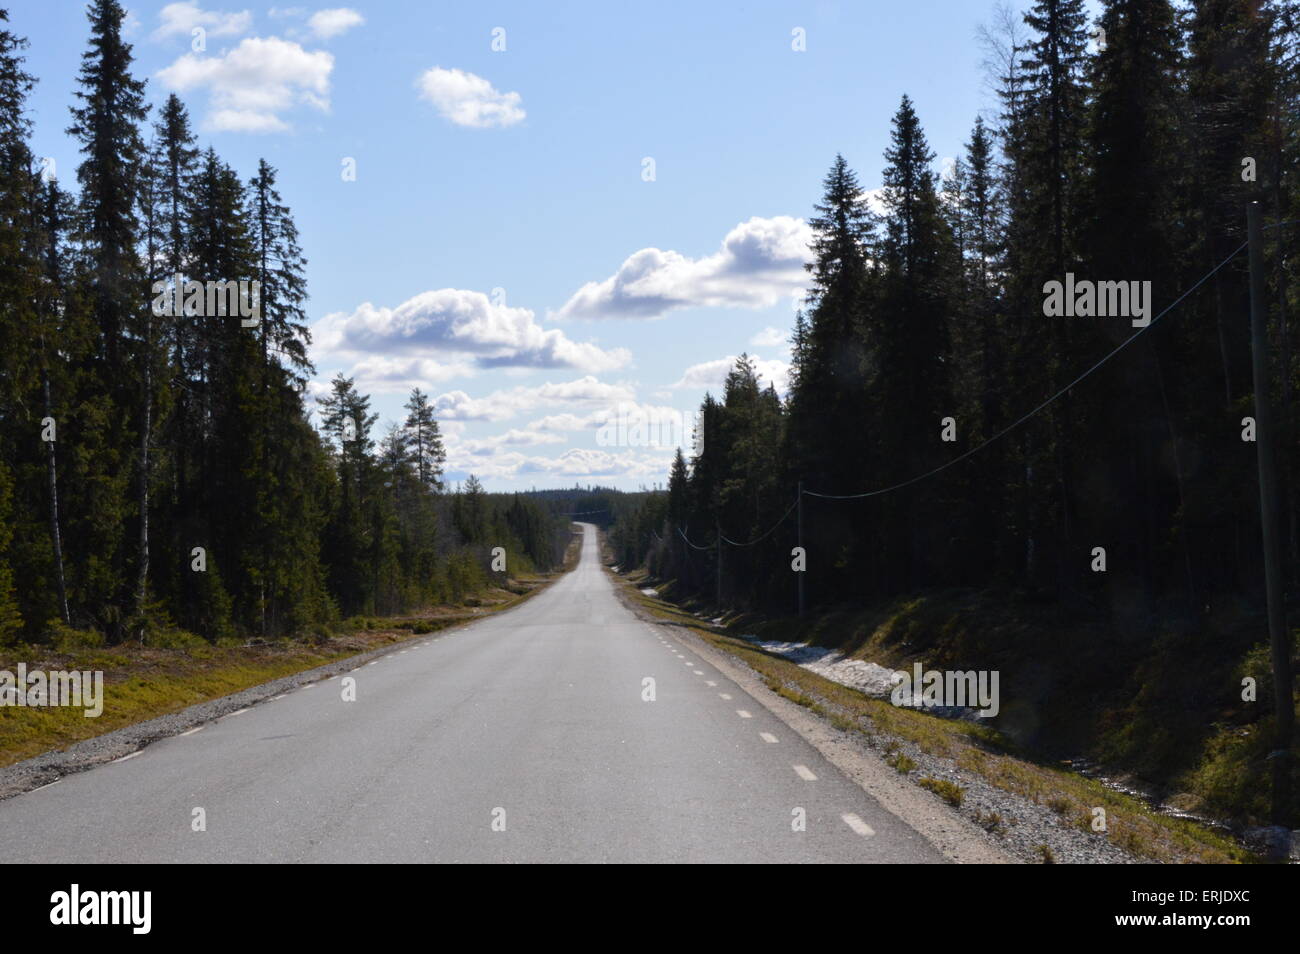 A road stretching far ahead. Stock Photo